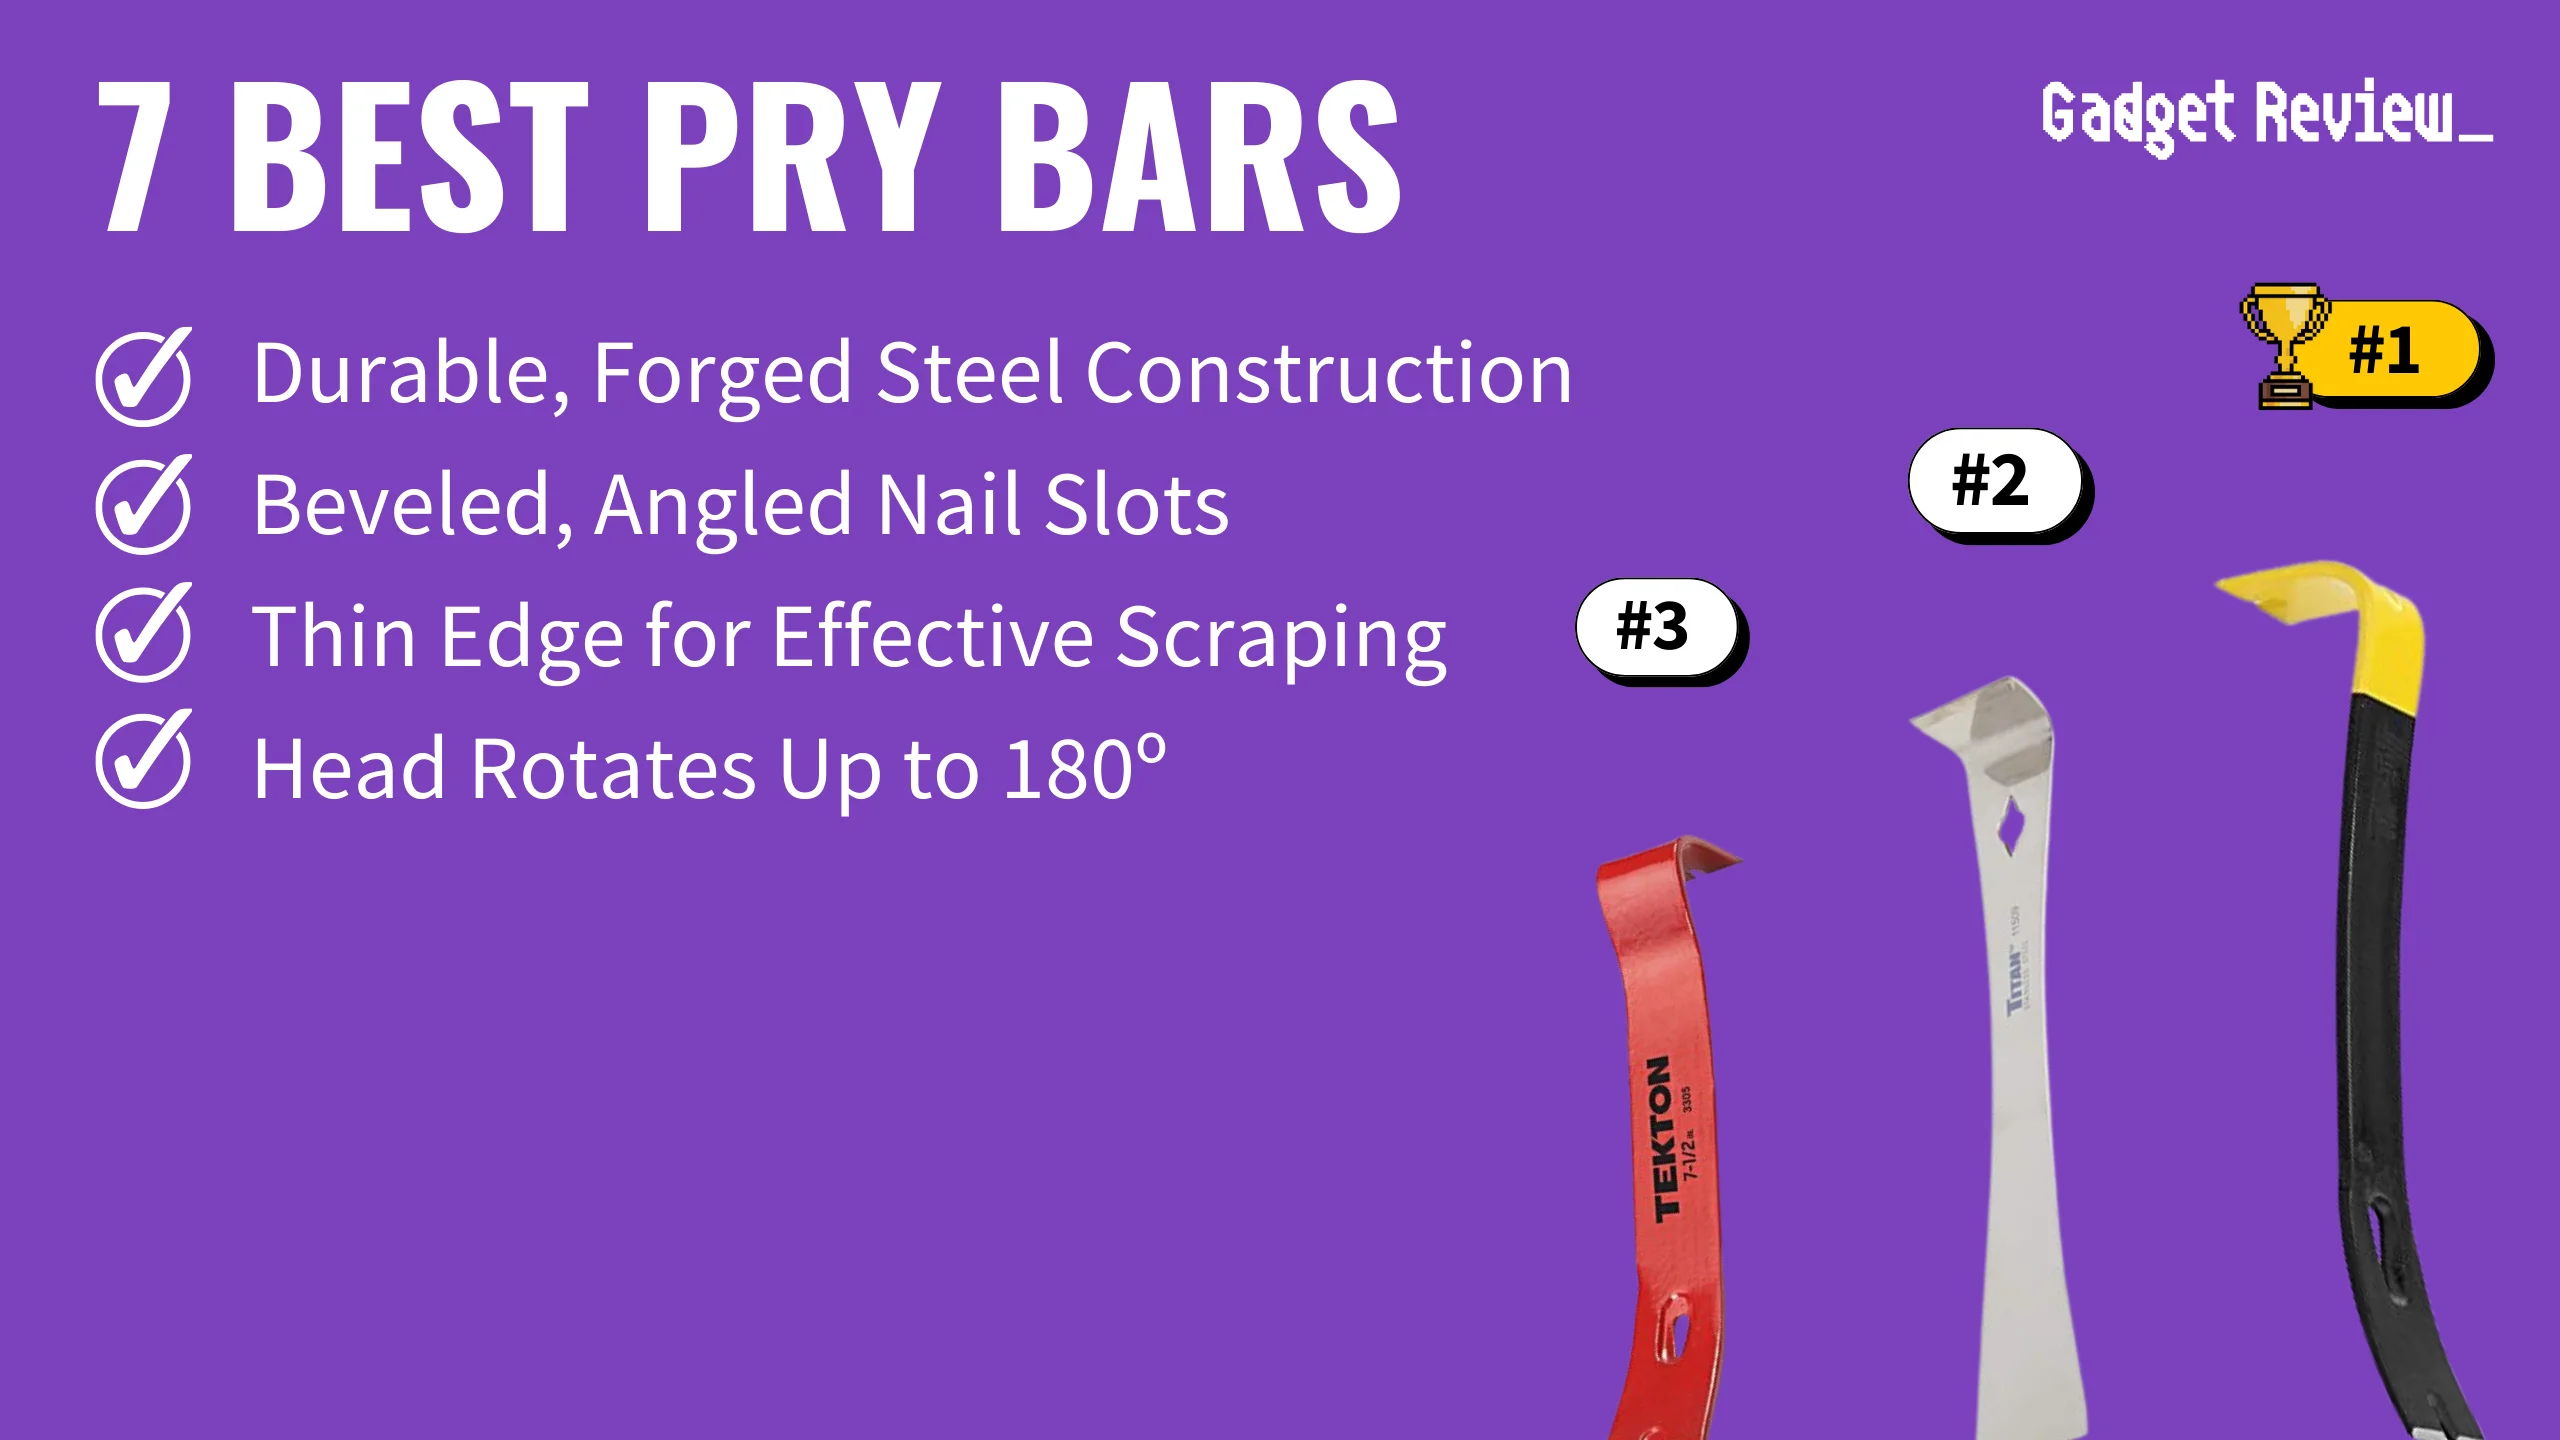 best pry bars featured image that shows the top three best tool models